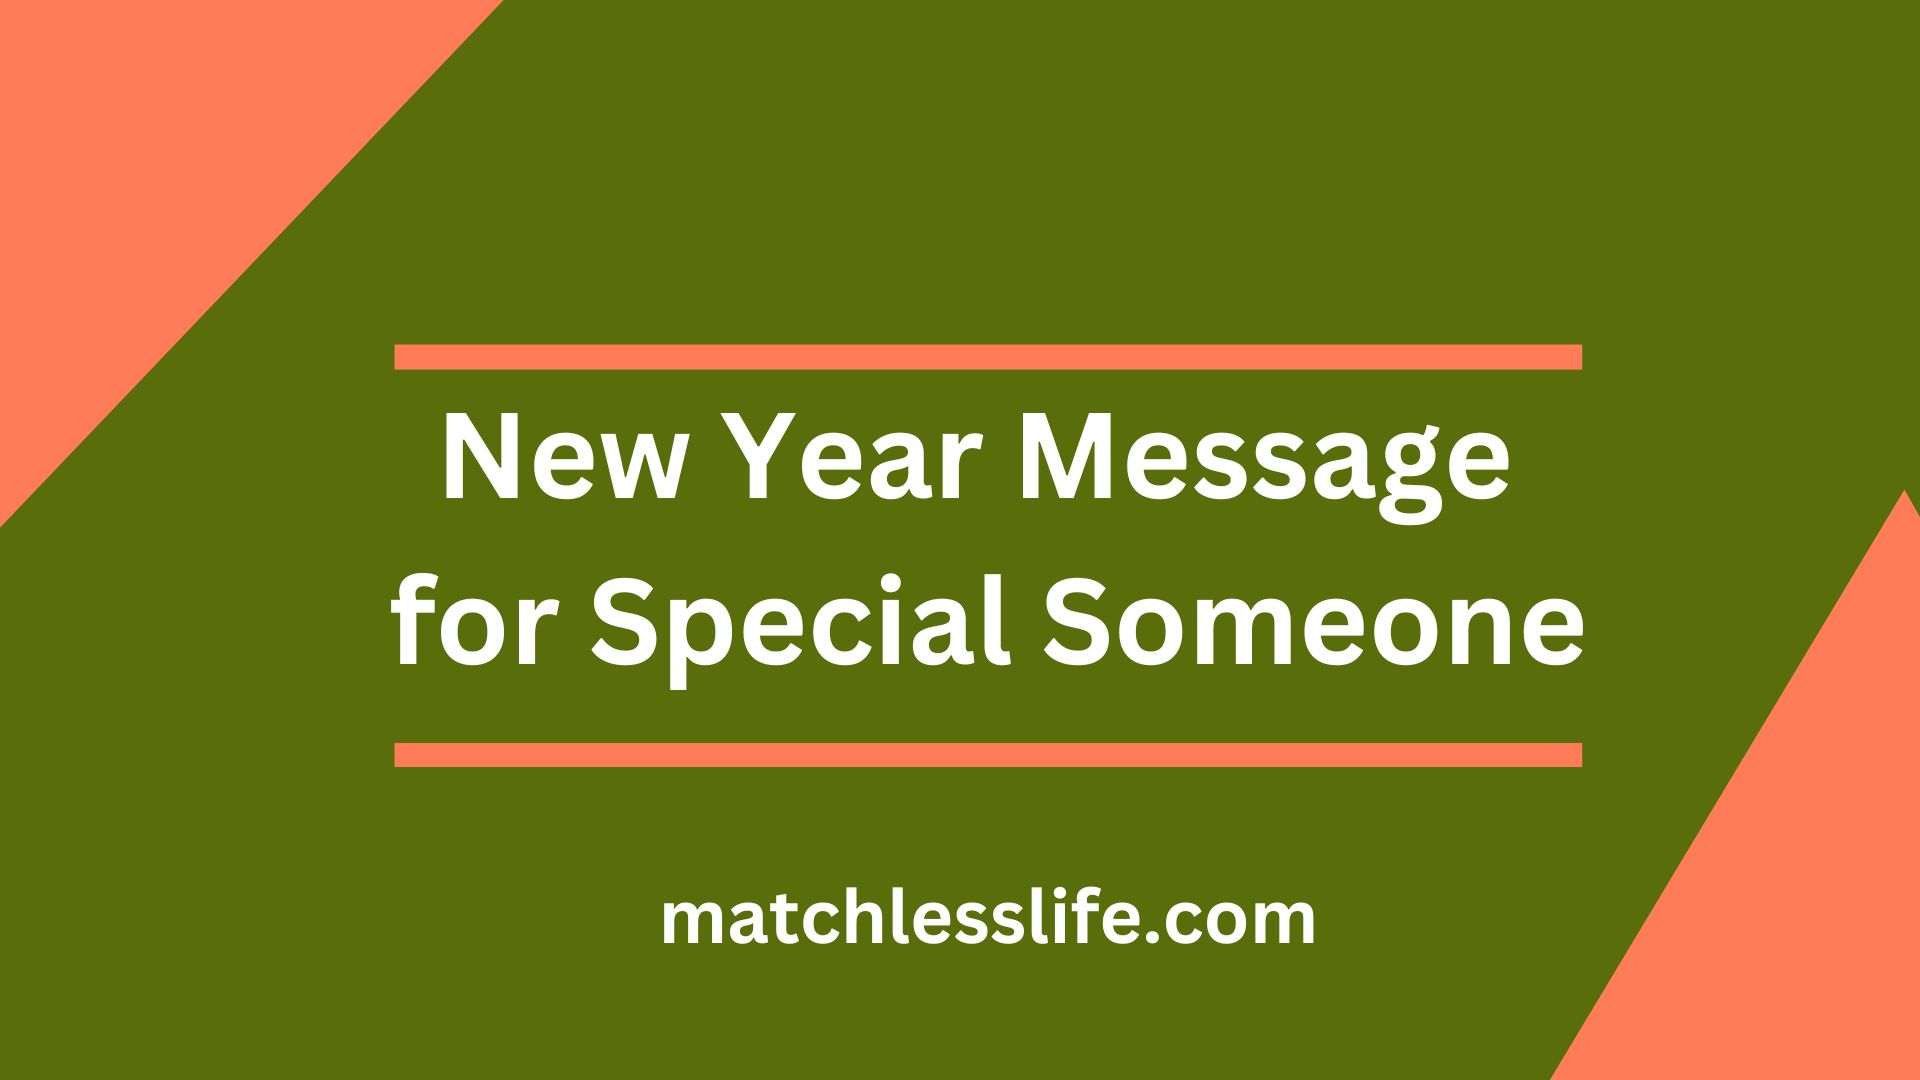 New Year Message for Special Someone